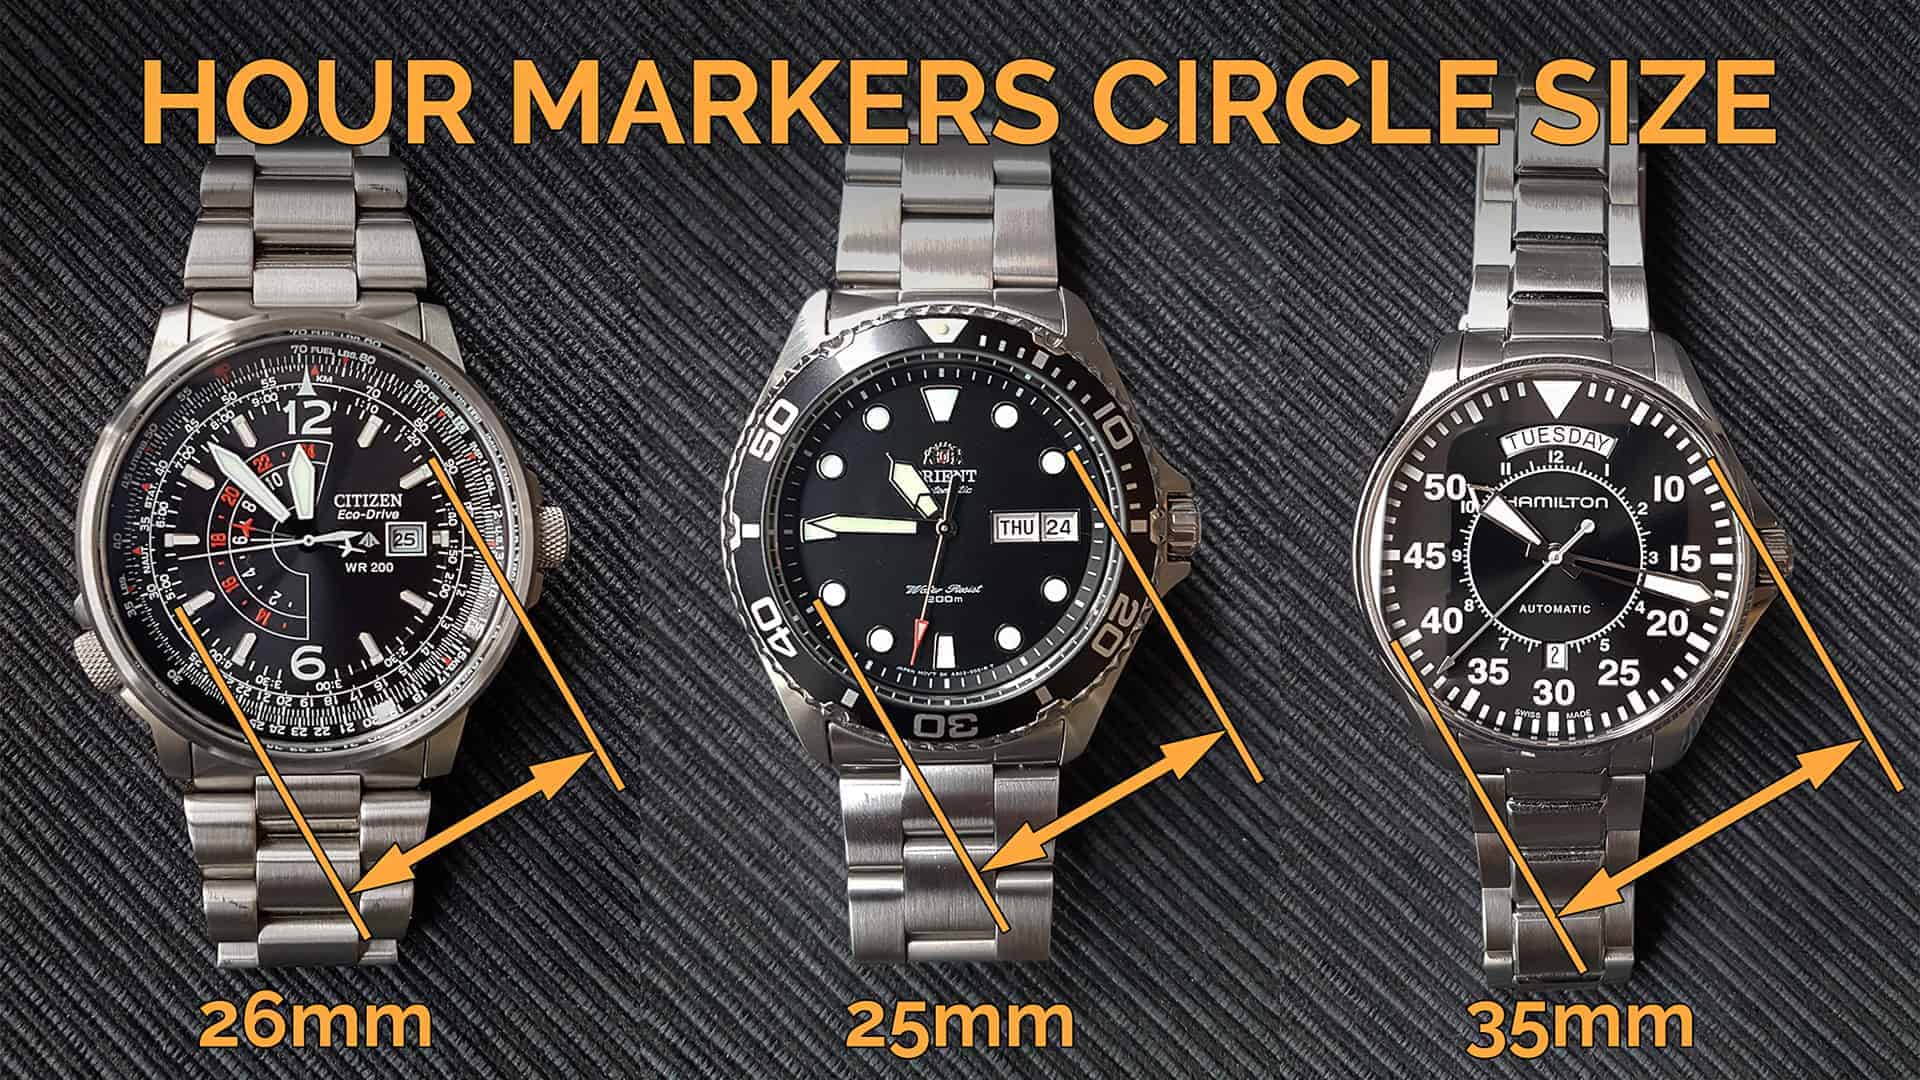 The Ultimate Watch Size Guide + Watch Size Calculator-6